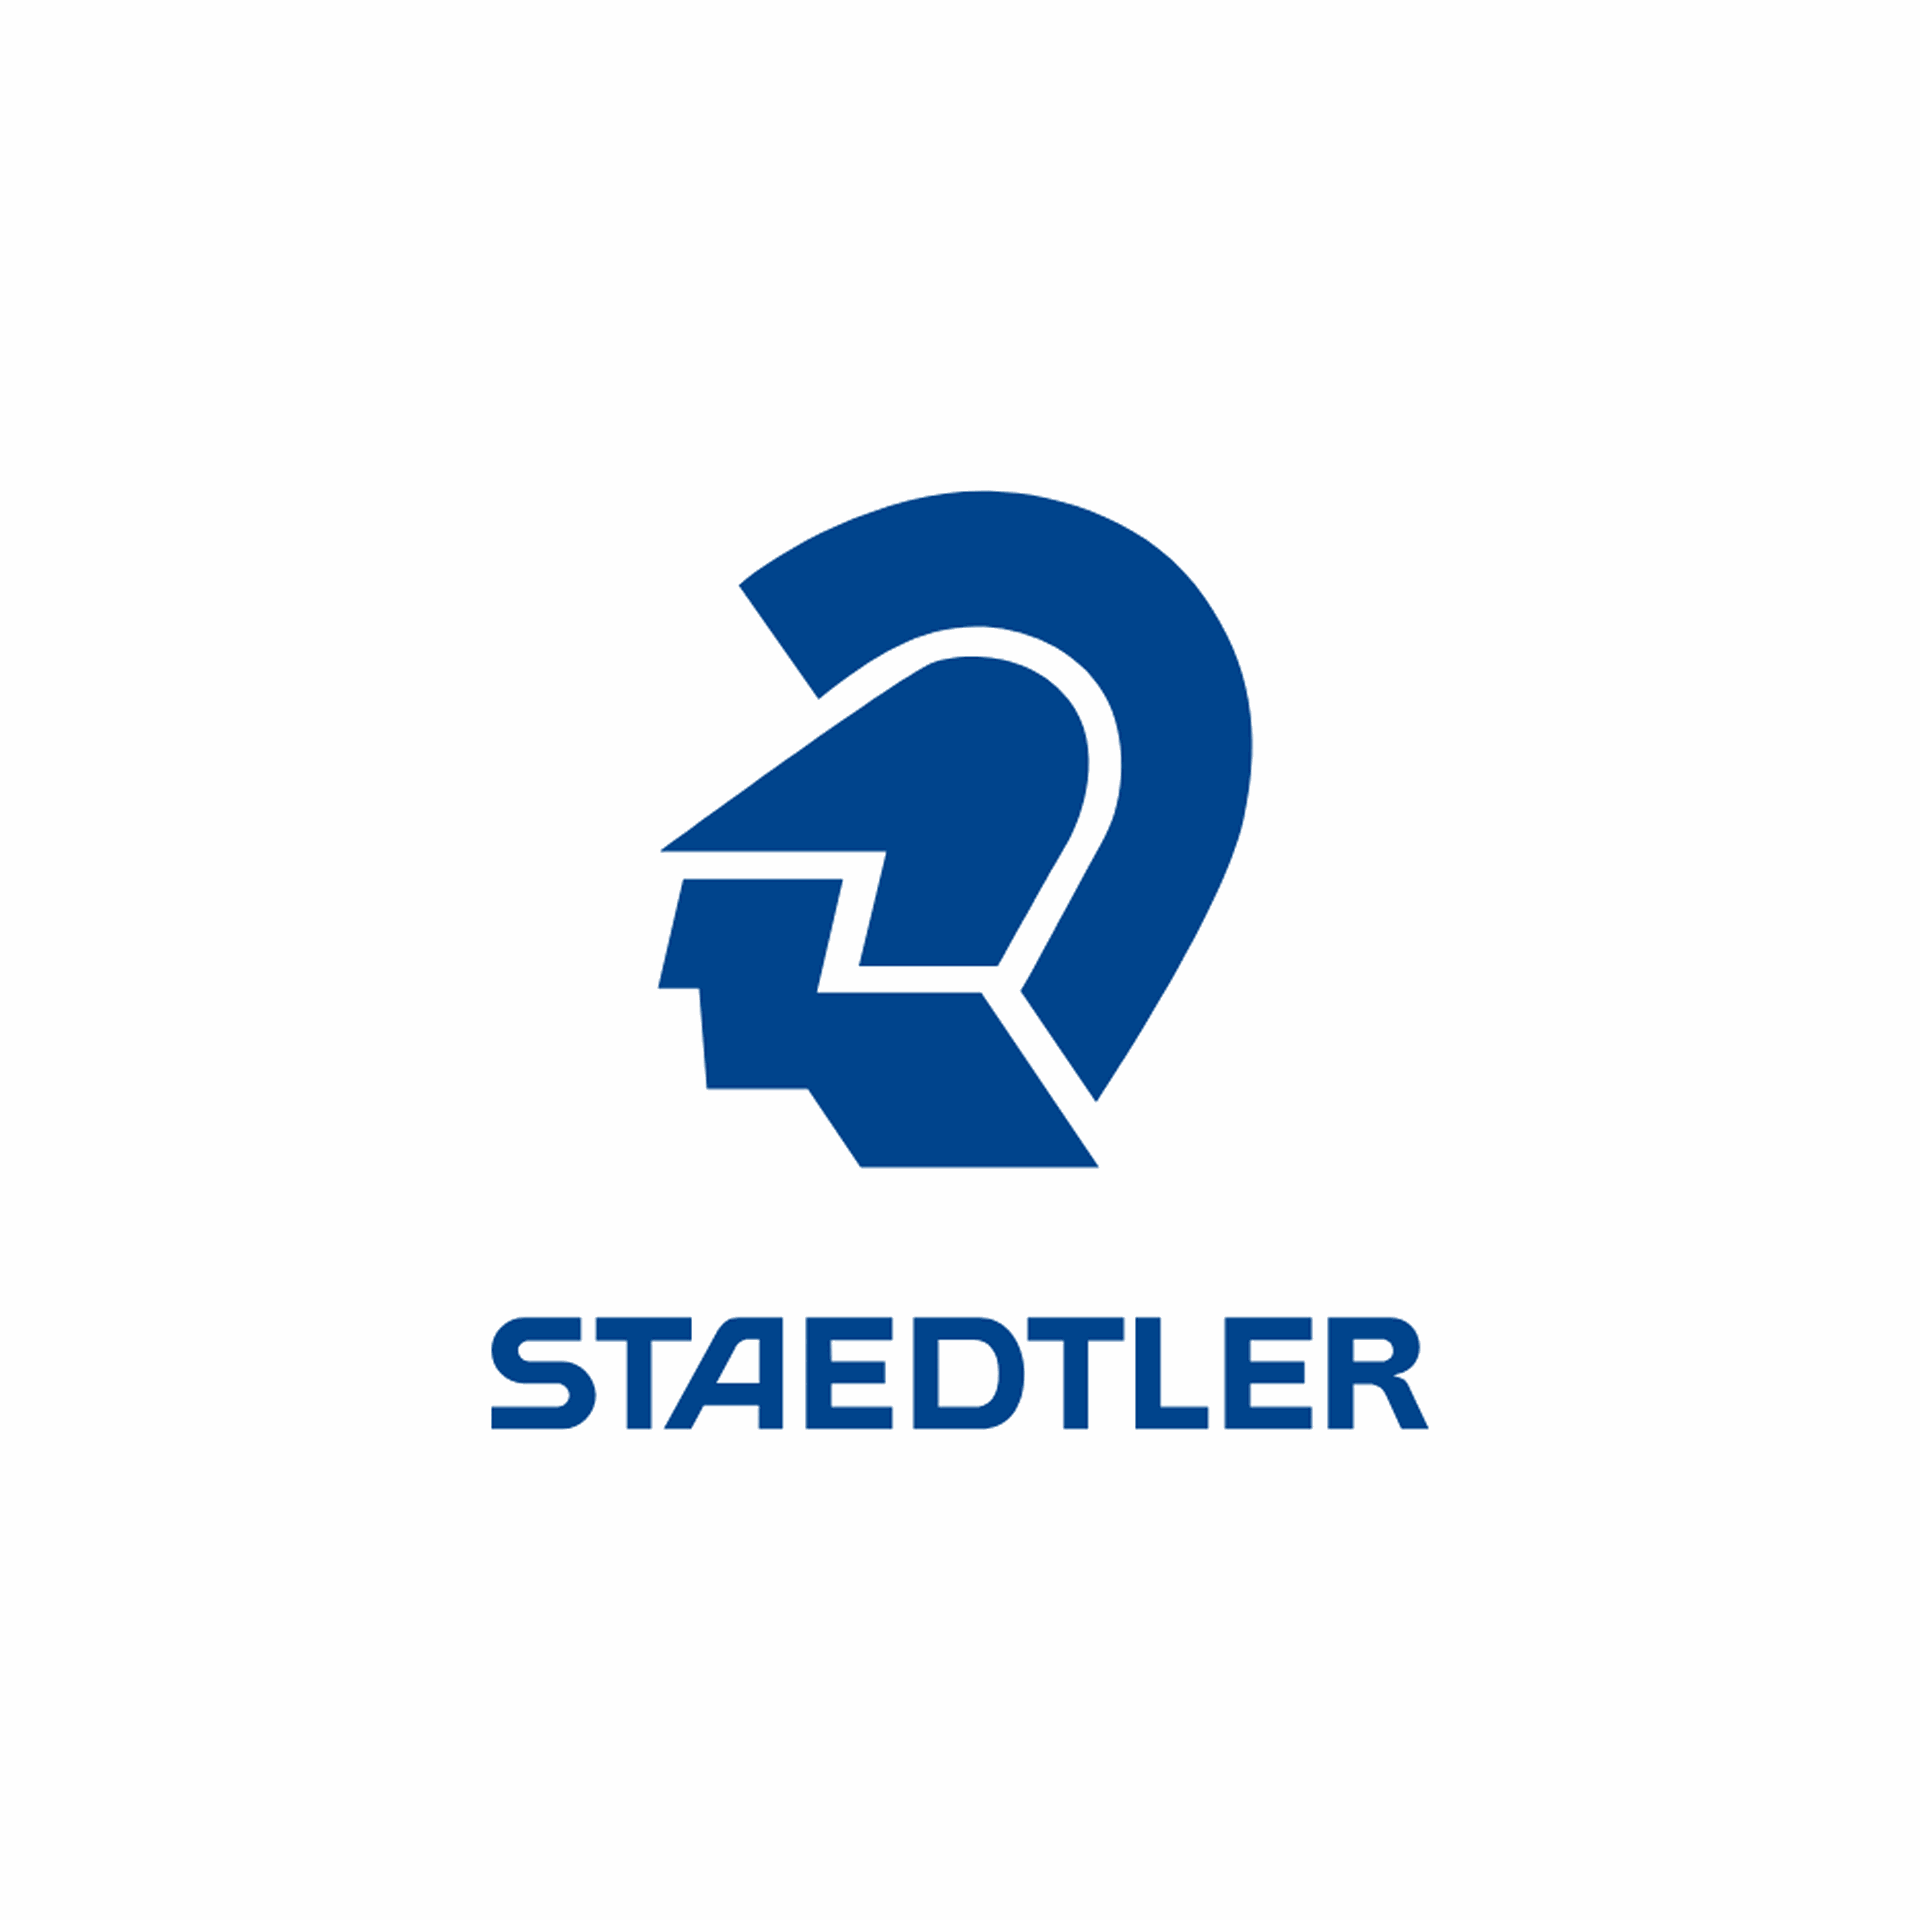 Product Brand: Staedler